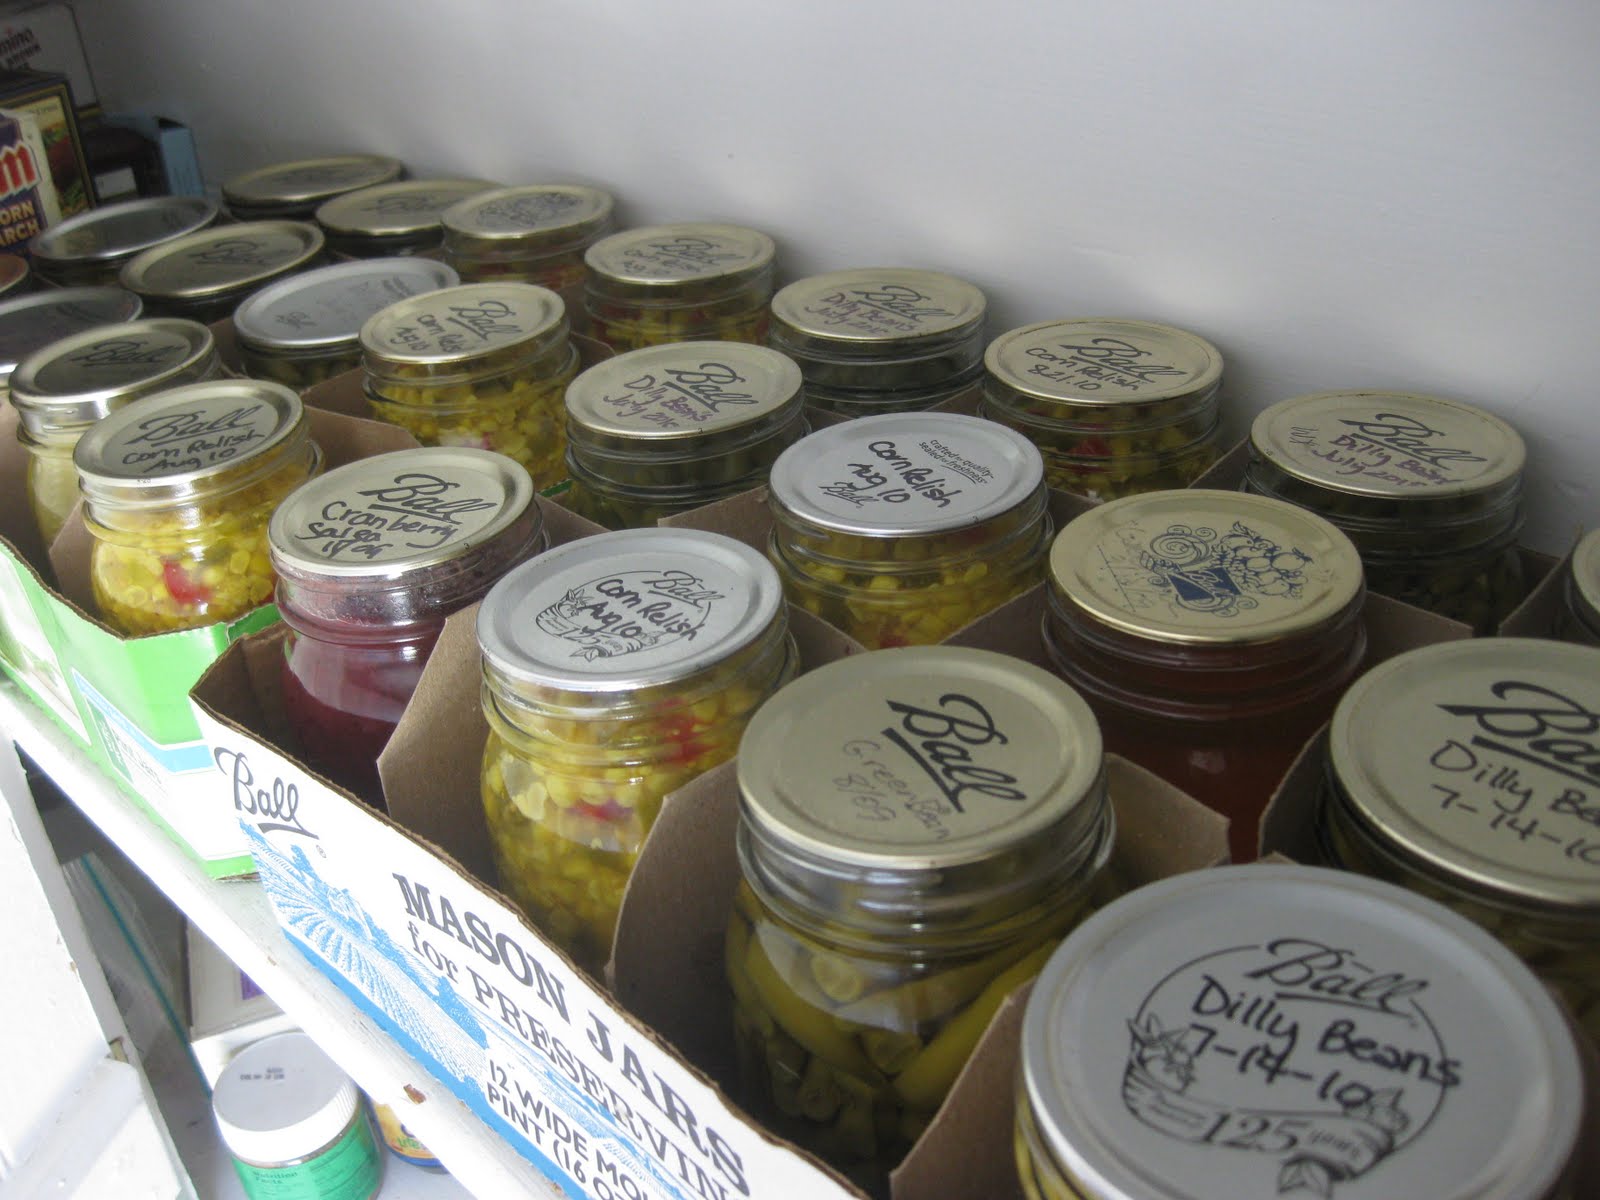 The Blueberry Files: How to Store Home Canned Goods